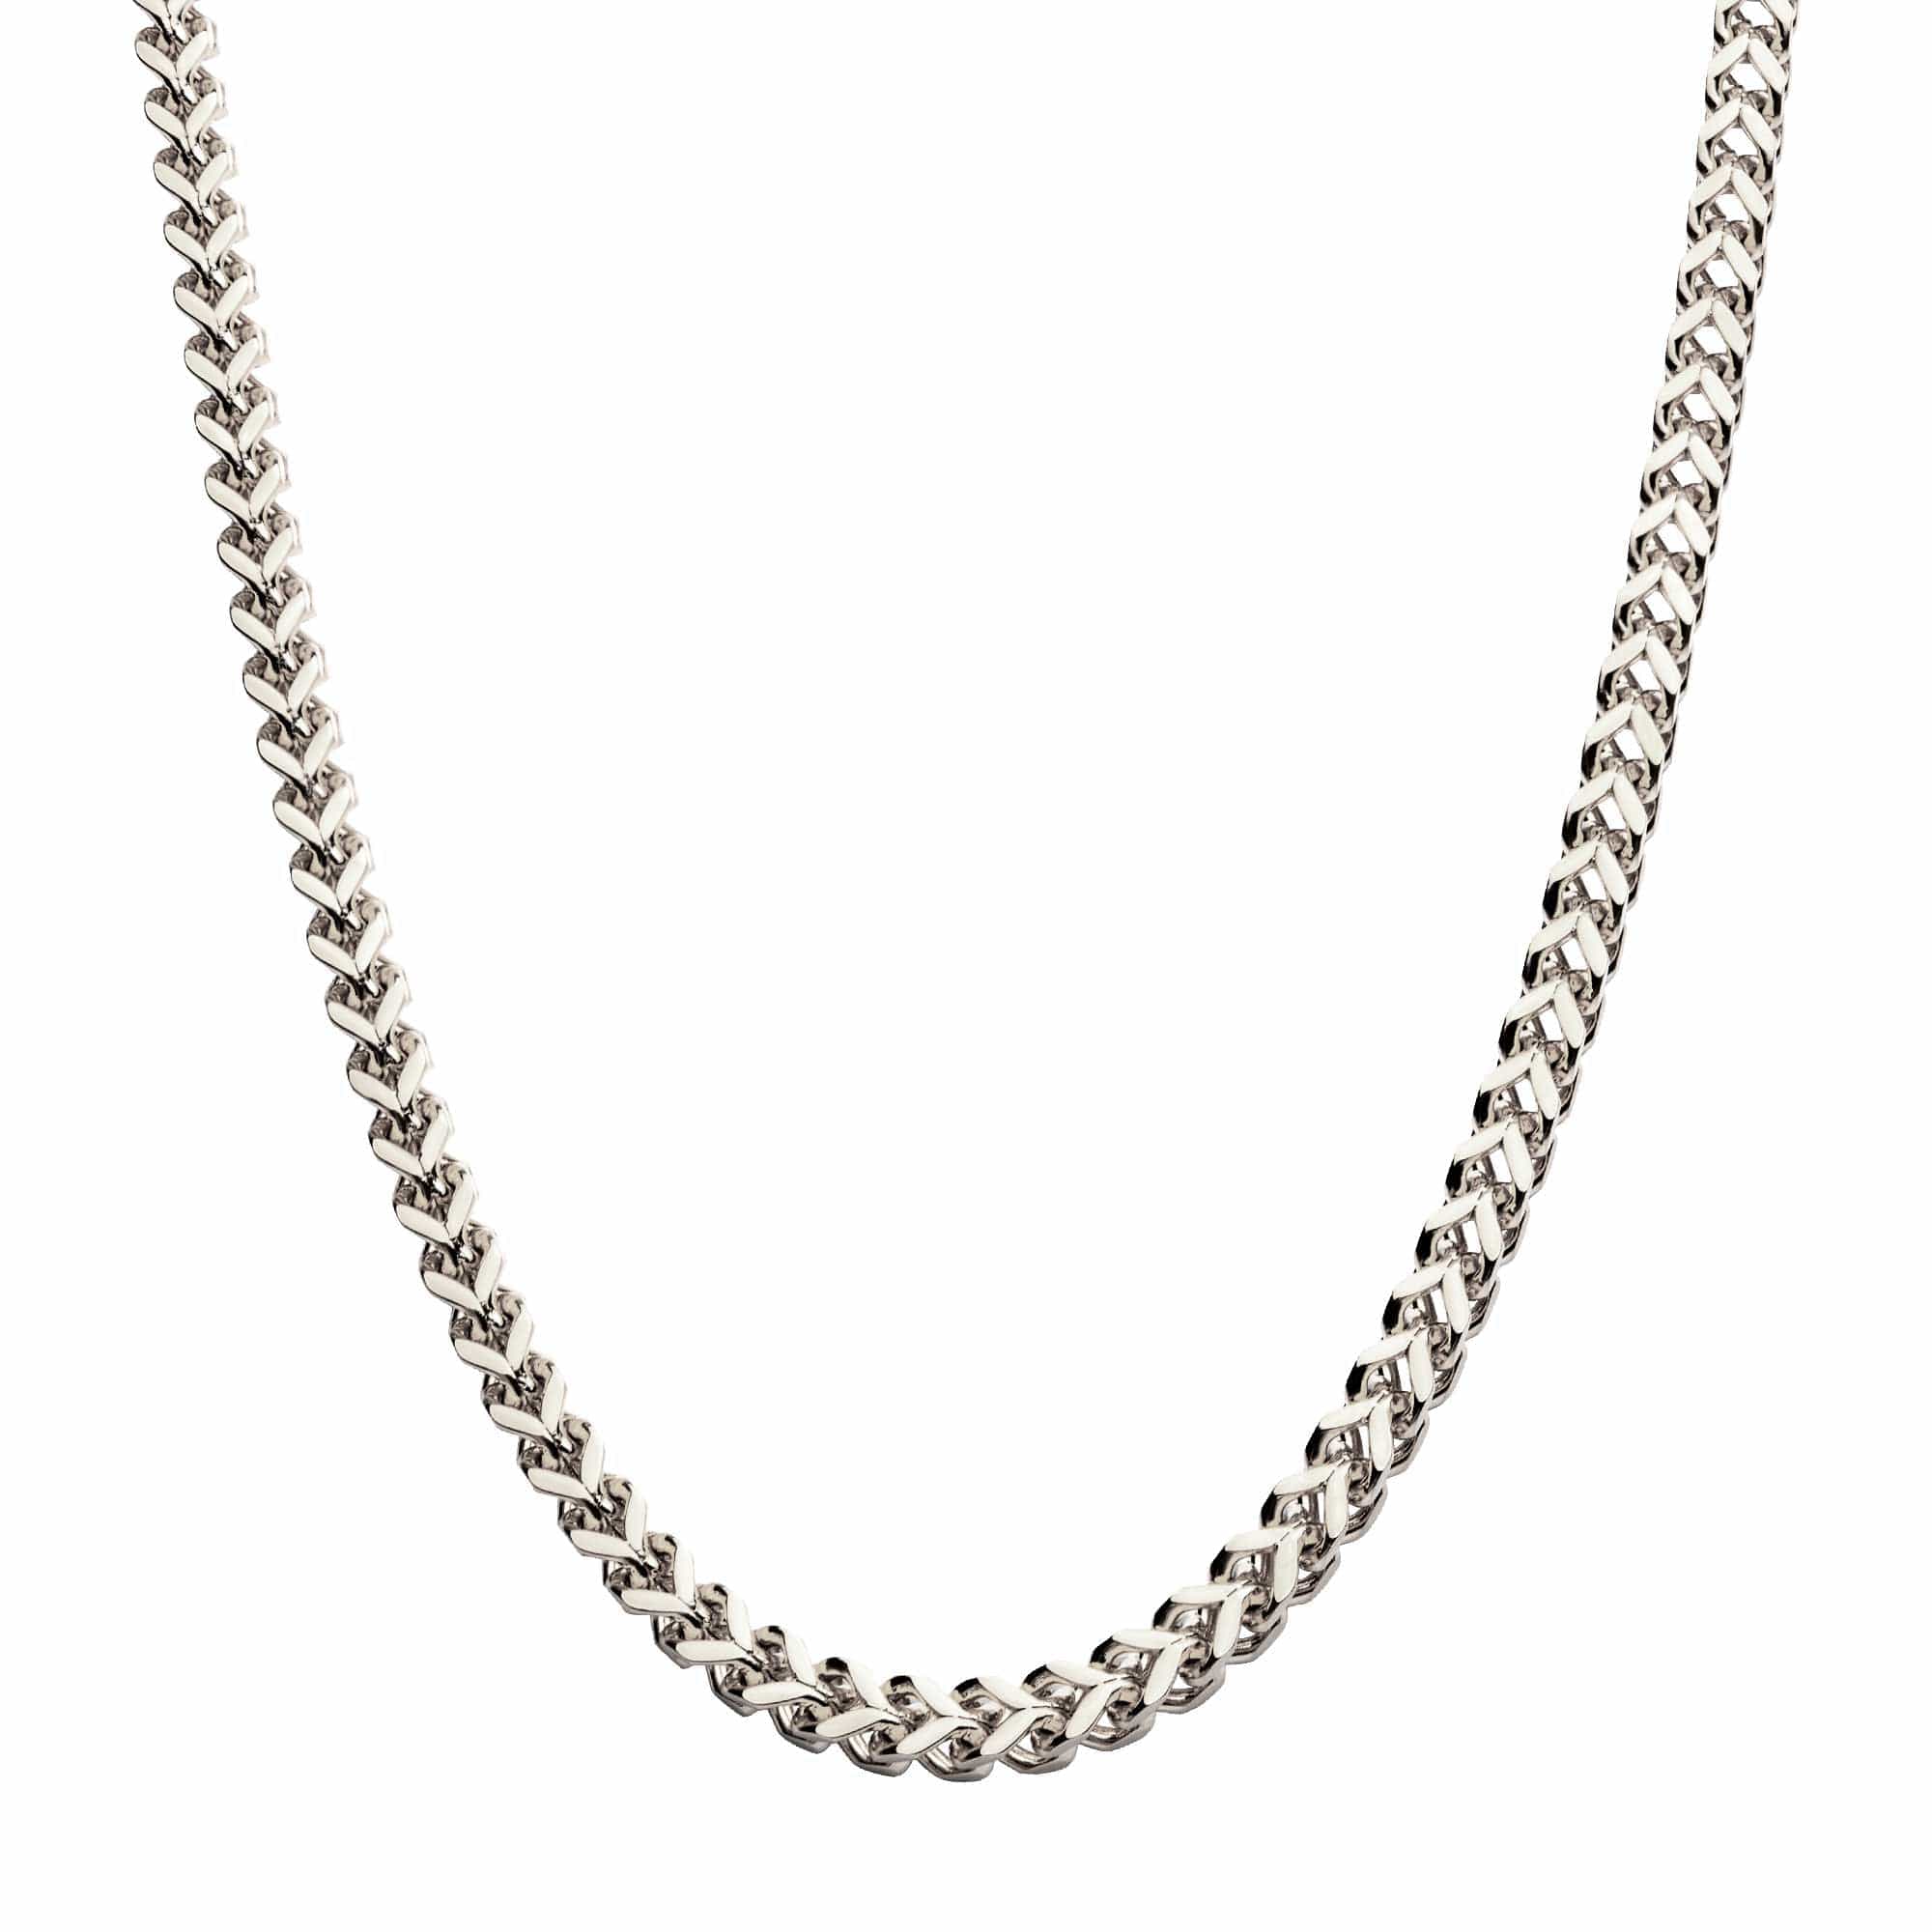 INOX JEWELRY Chains Silver Tone Stainless Steel 4mm Franco Chain